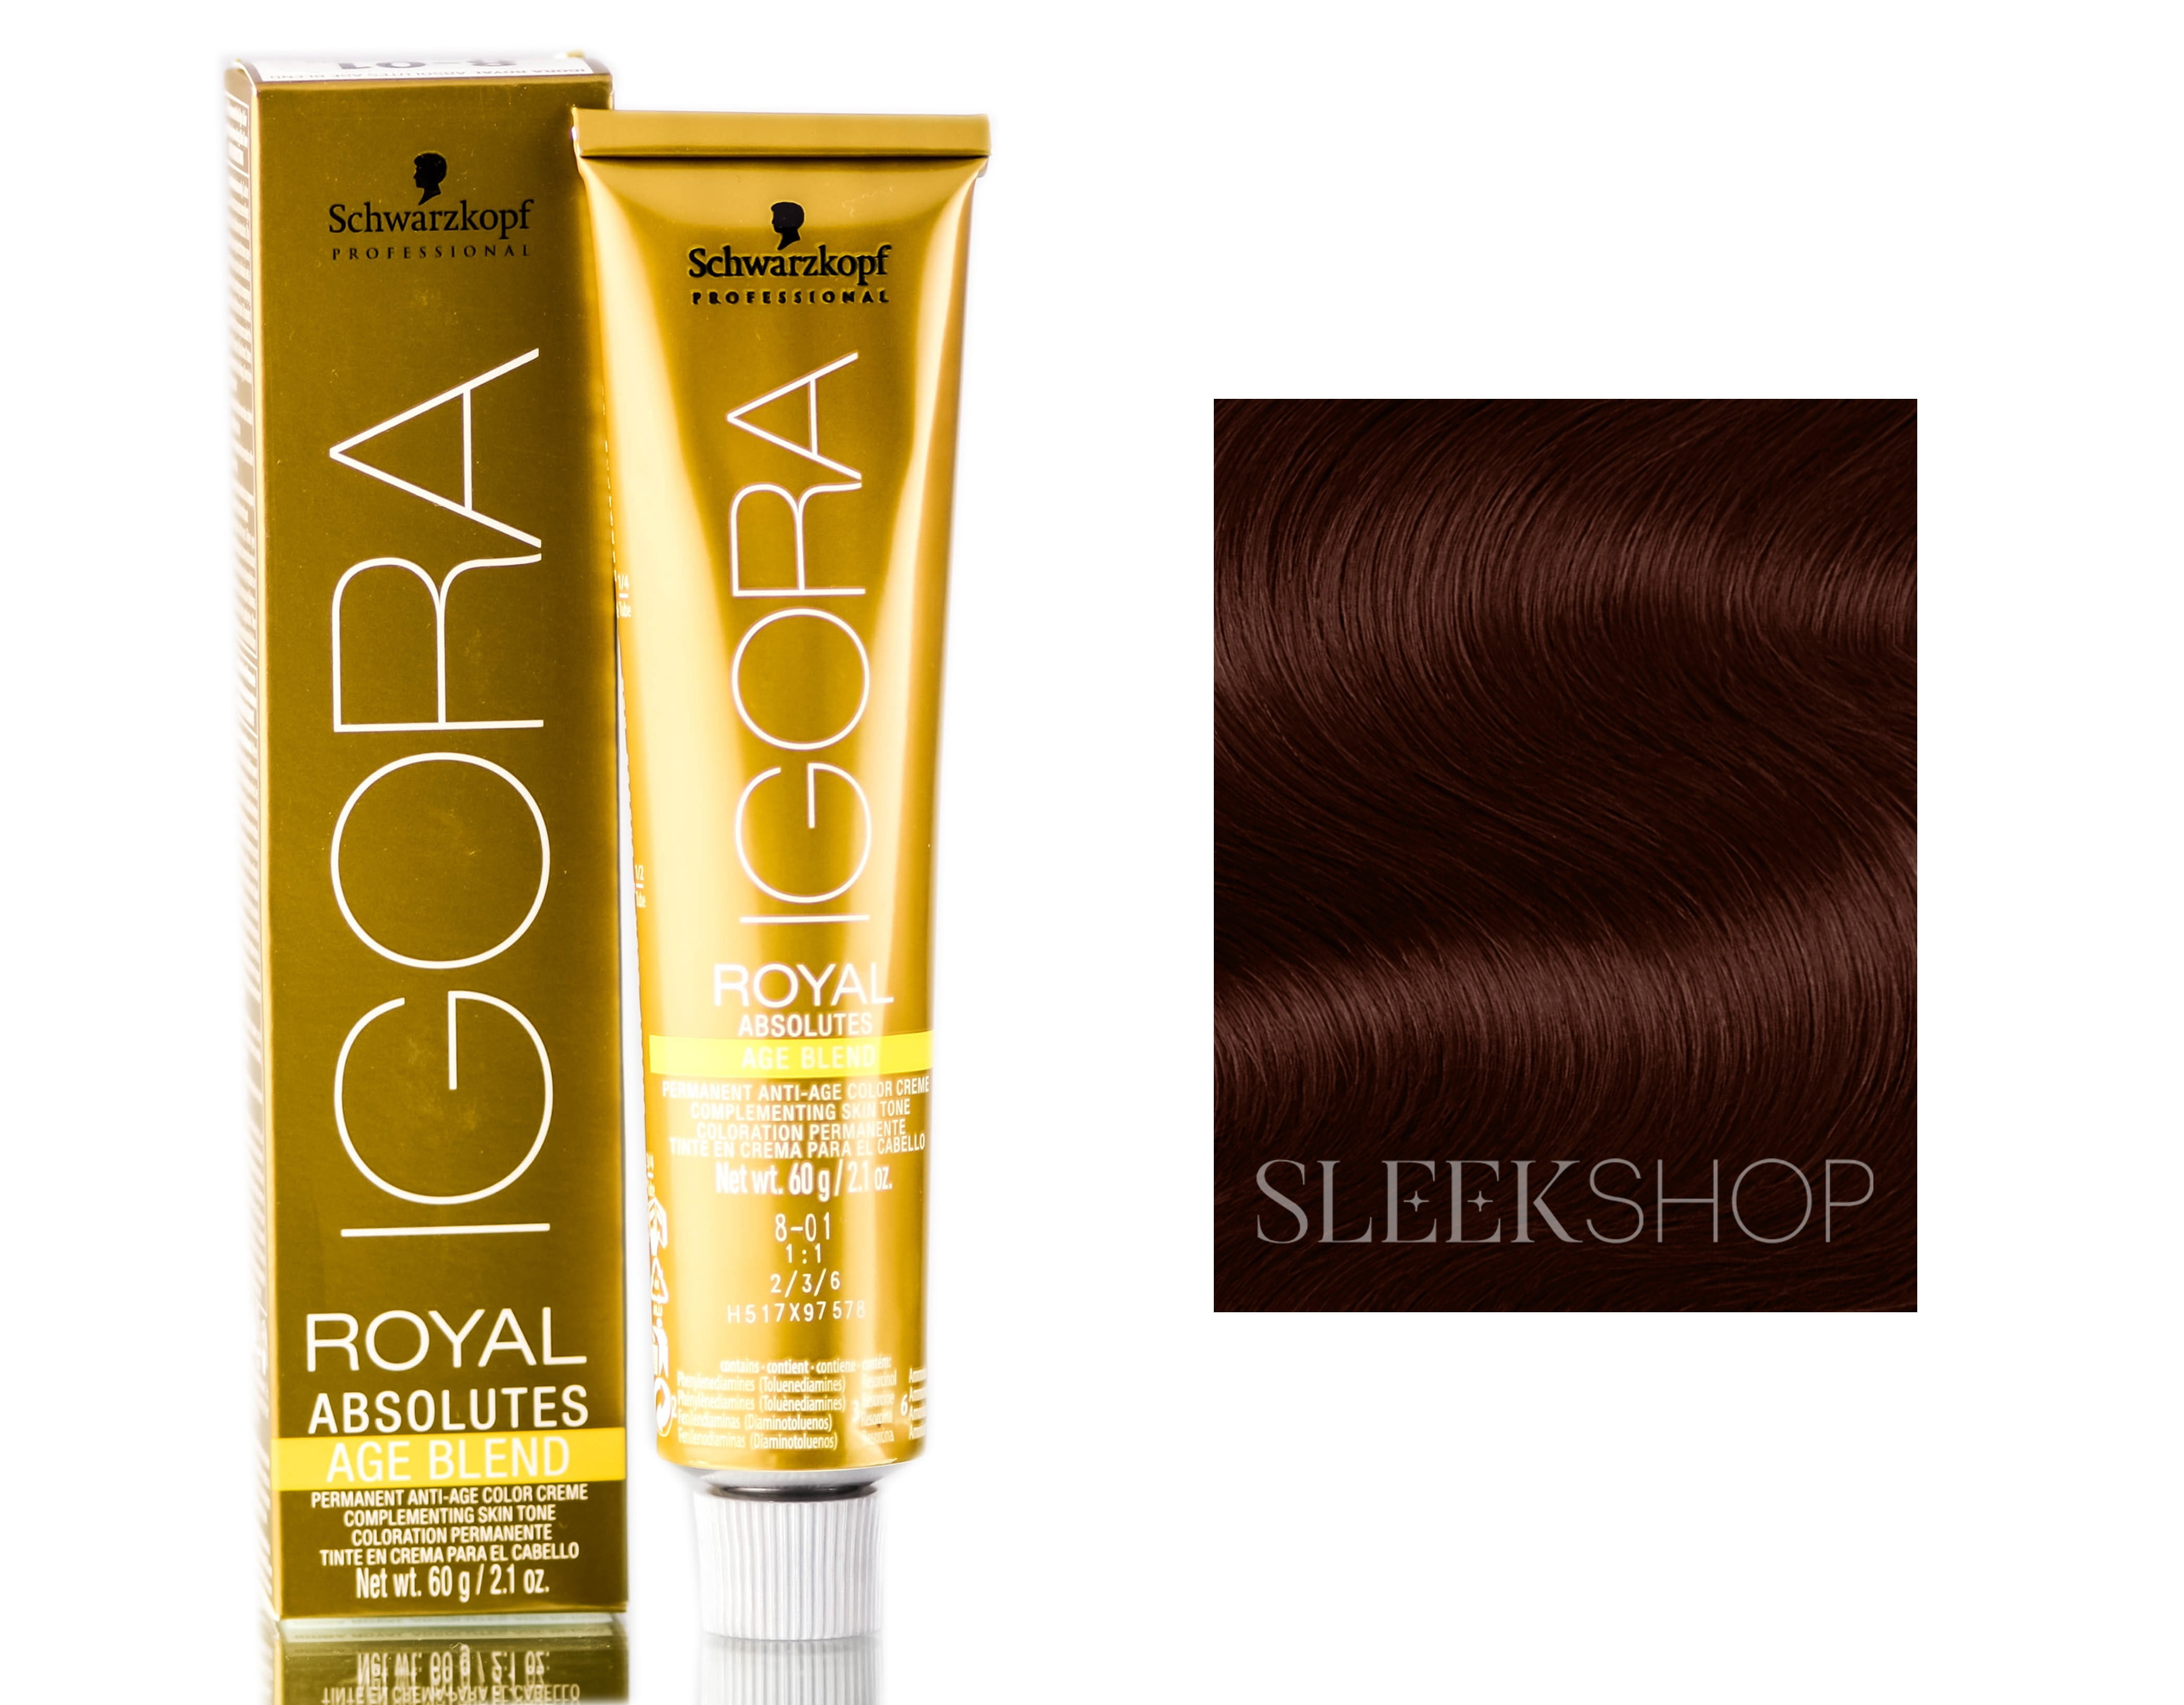 7. Schwarzkopf Professional Igora Royal Absolutes Silverwhite Hair Color in Blue - wide 1